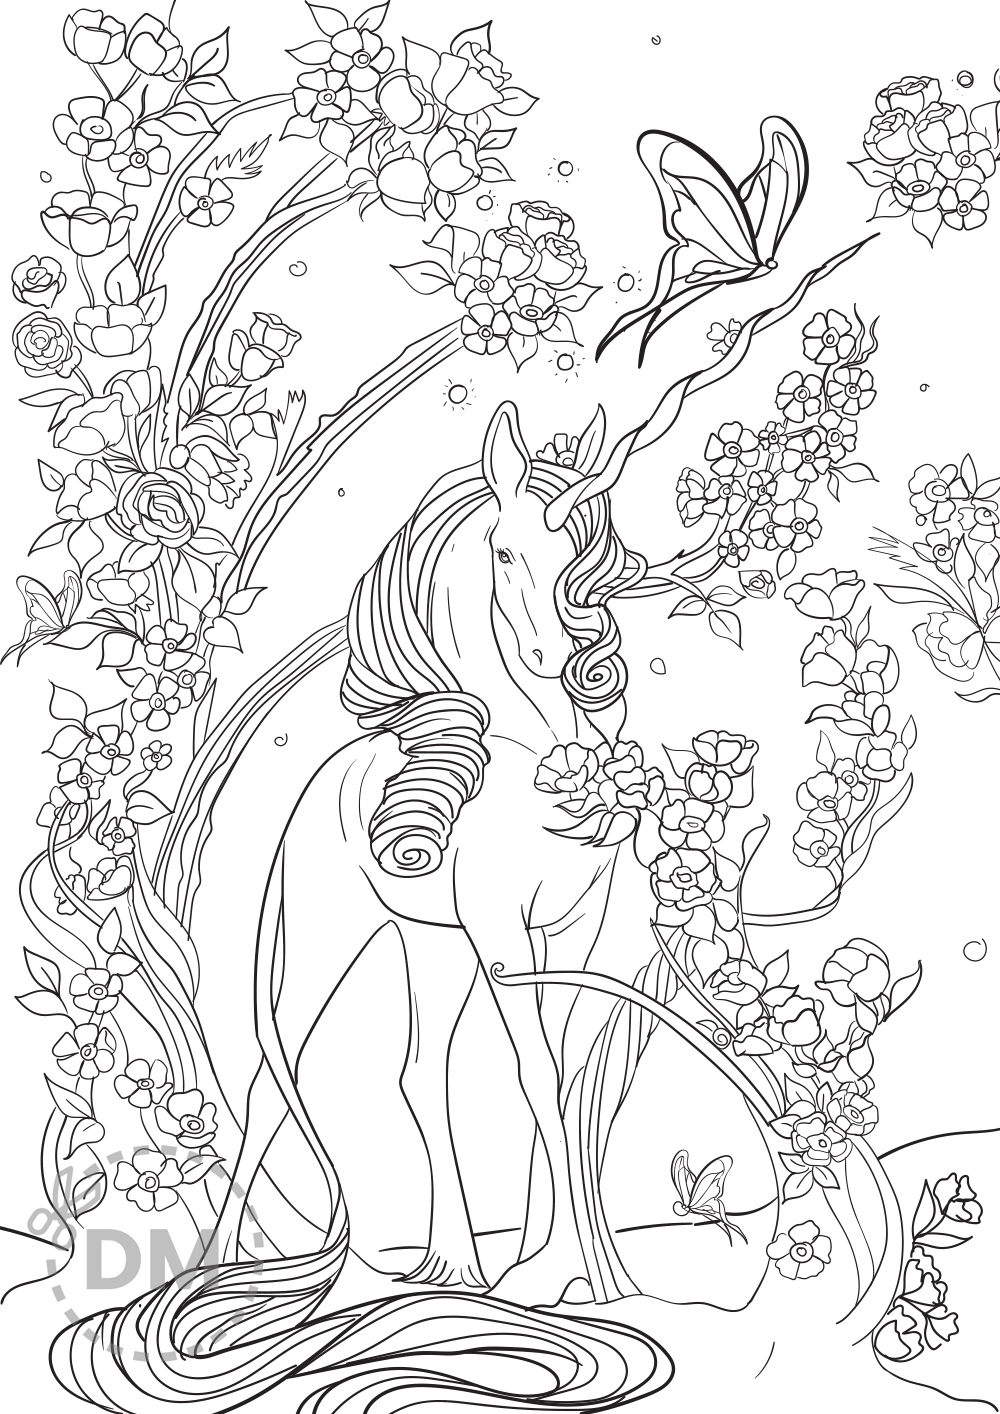 Unicorn Coloring Page for Adults   Printable Page for Download ...